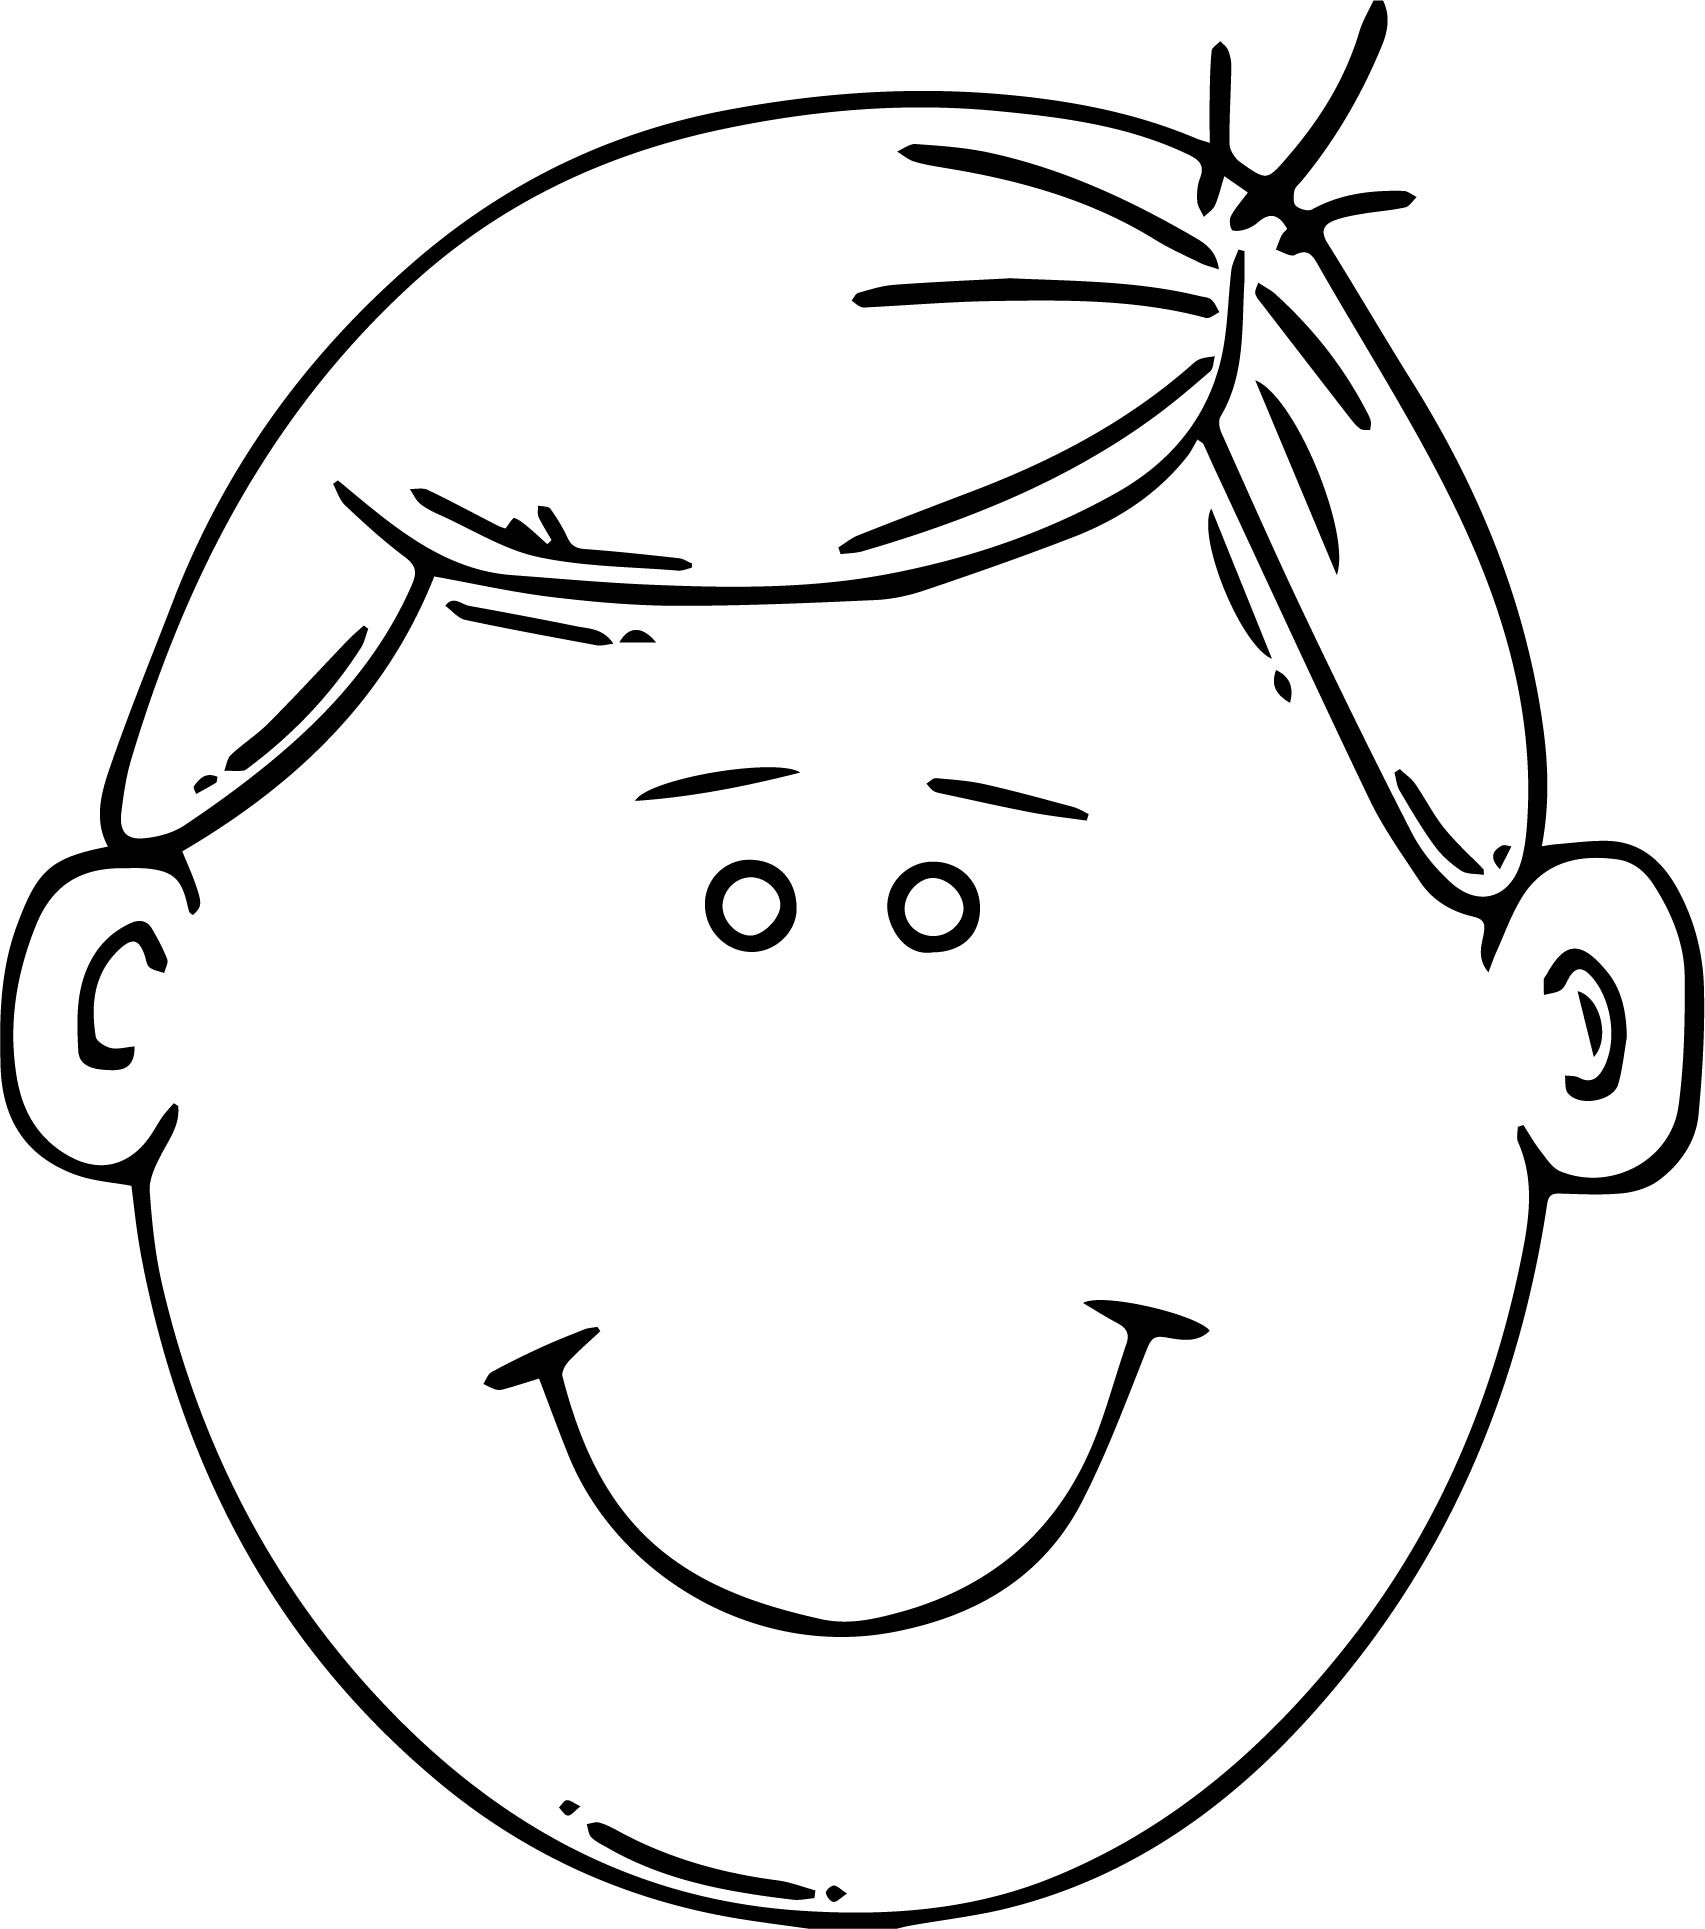 Boys Face Coloring Pages
 Great Boy Face Coloring Page